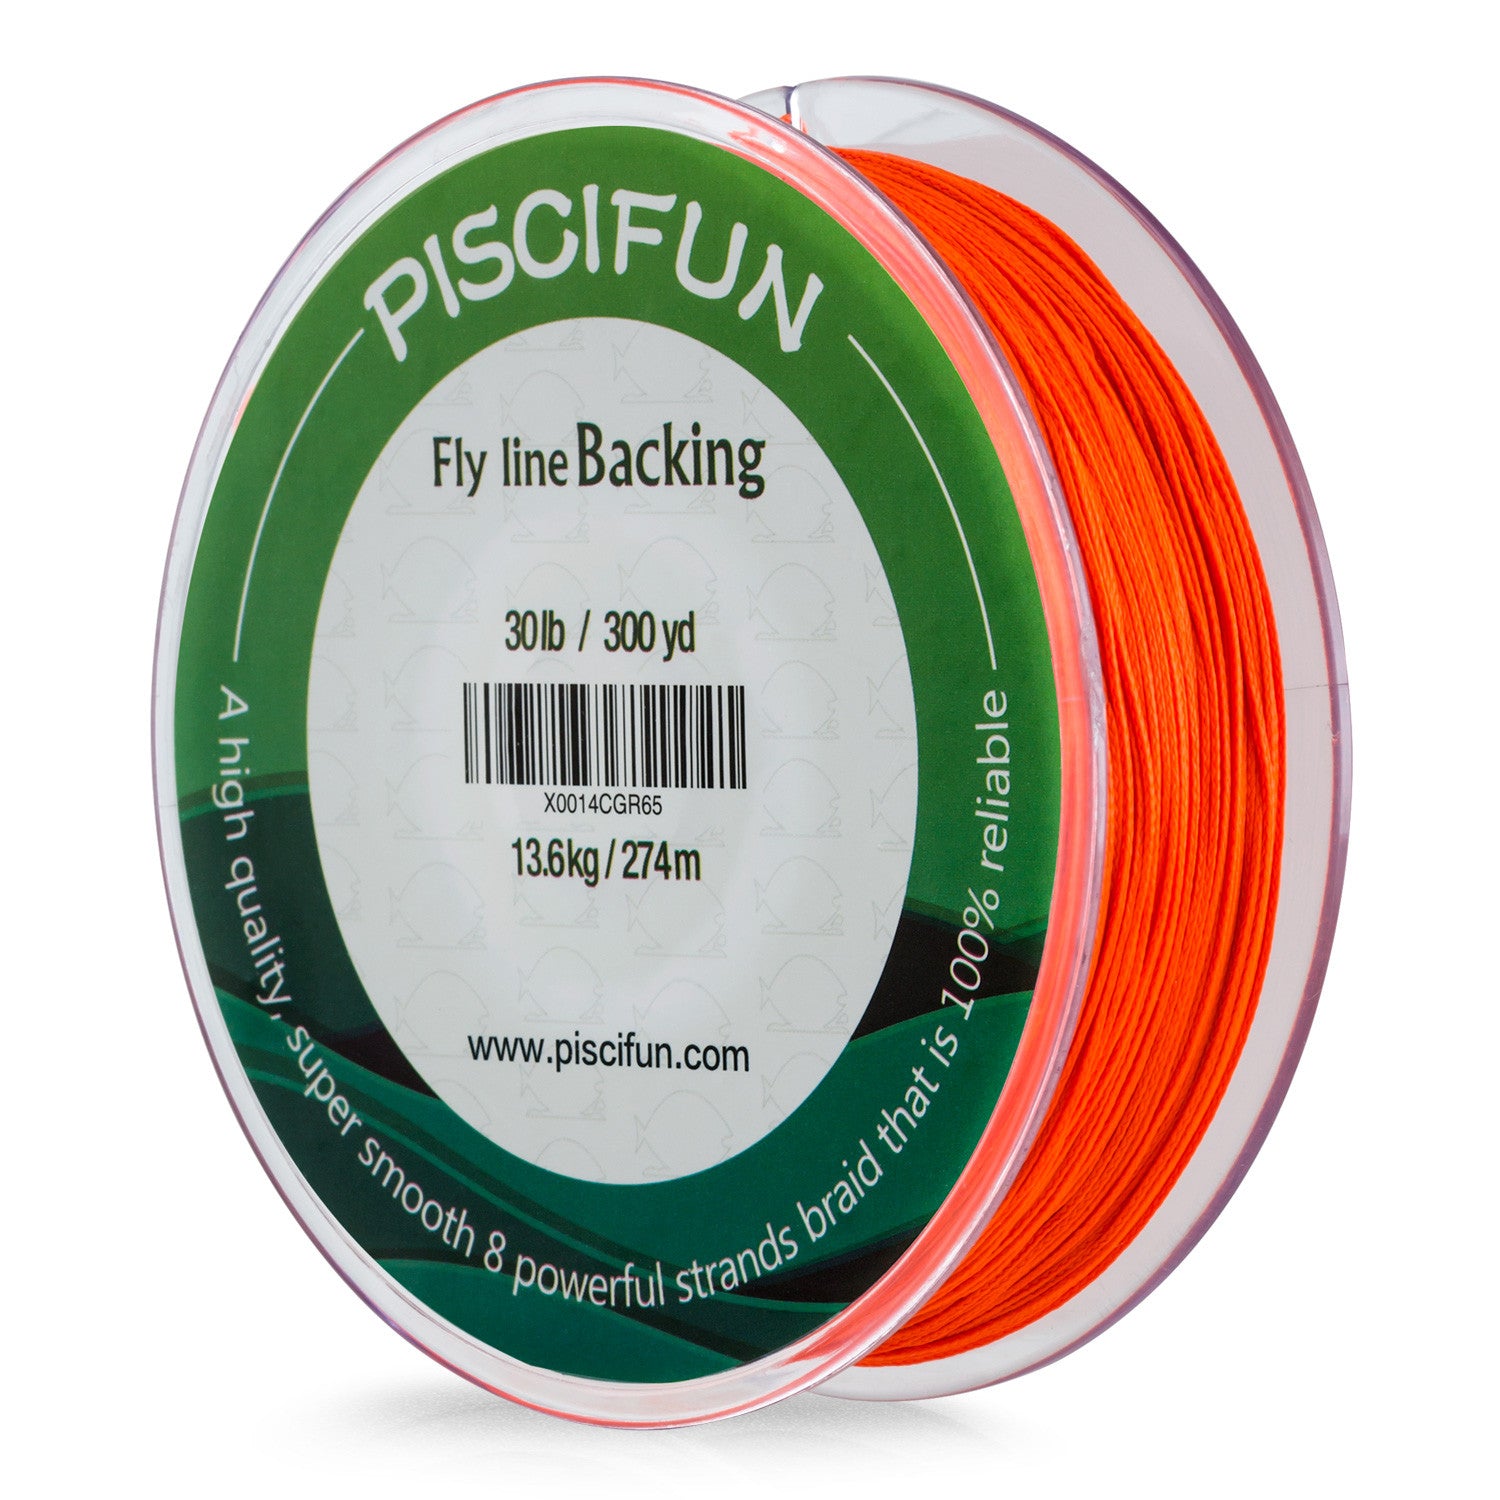 Piscifun Sword Fly Fishing Line  Weight Forward Floating Fly Line